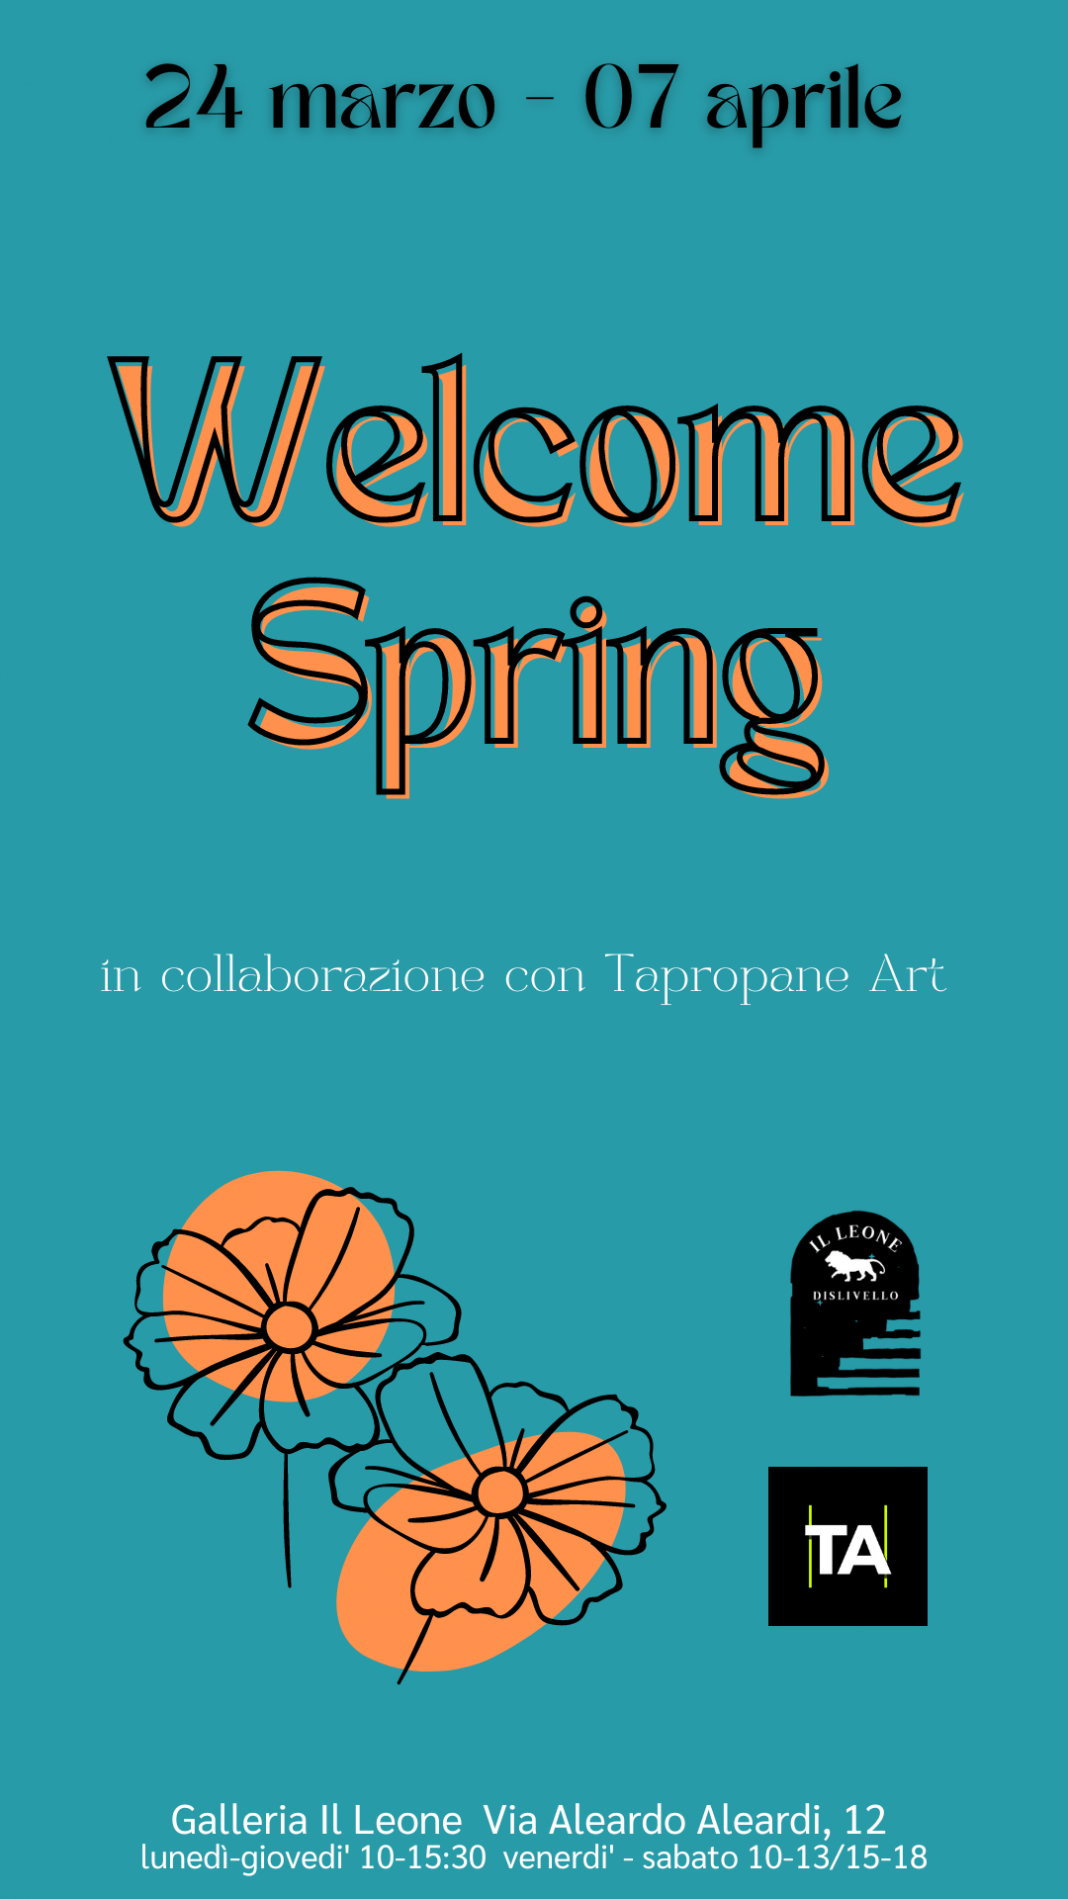 WELCOME SPRINGhttps://www.exibart.com/repository/media/formidable/11/img/b3f/Welcome-Spring-LOCANDINA-1068x1899.png